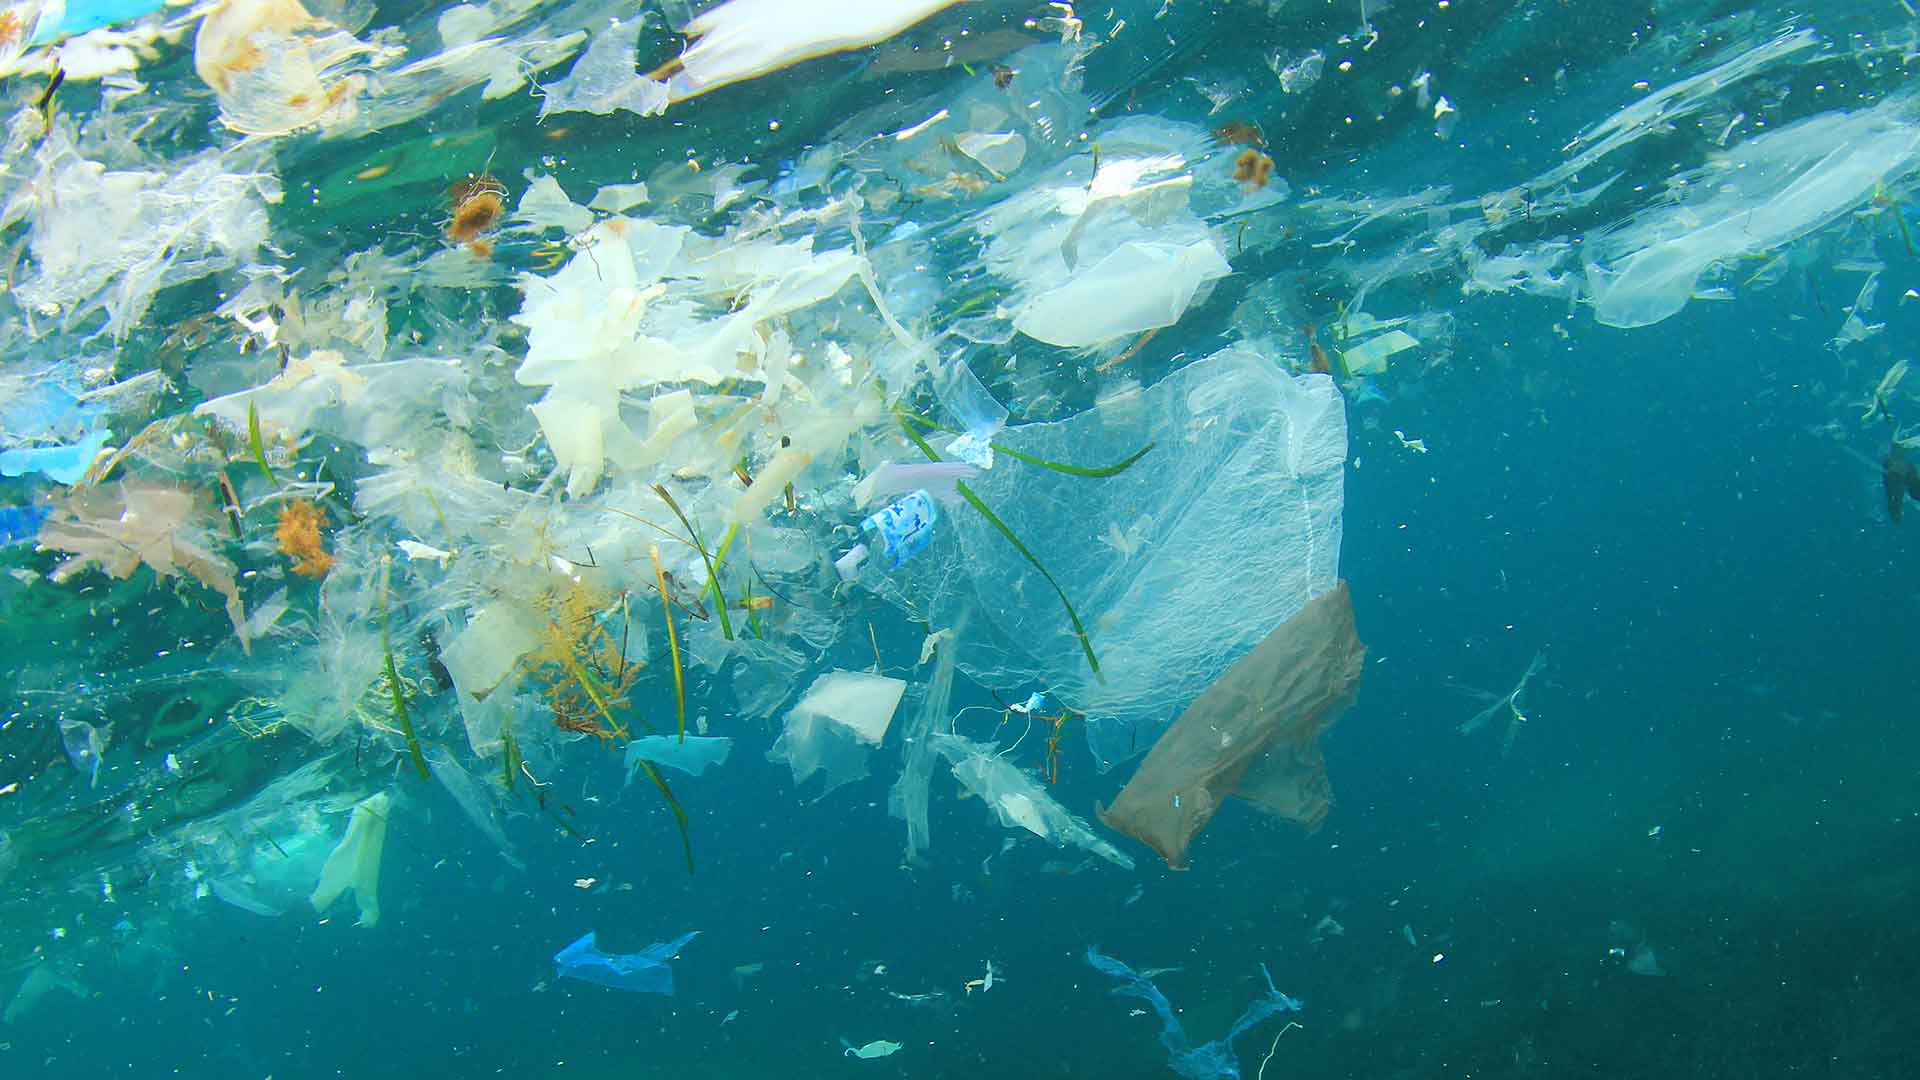 Reducing plastic pollution in our oceans – World Environment Day